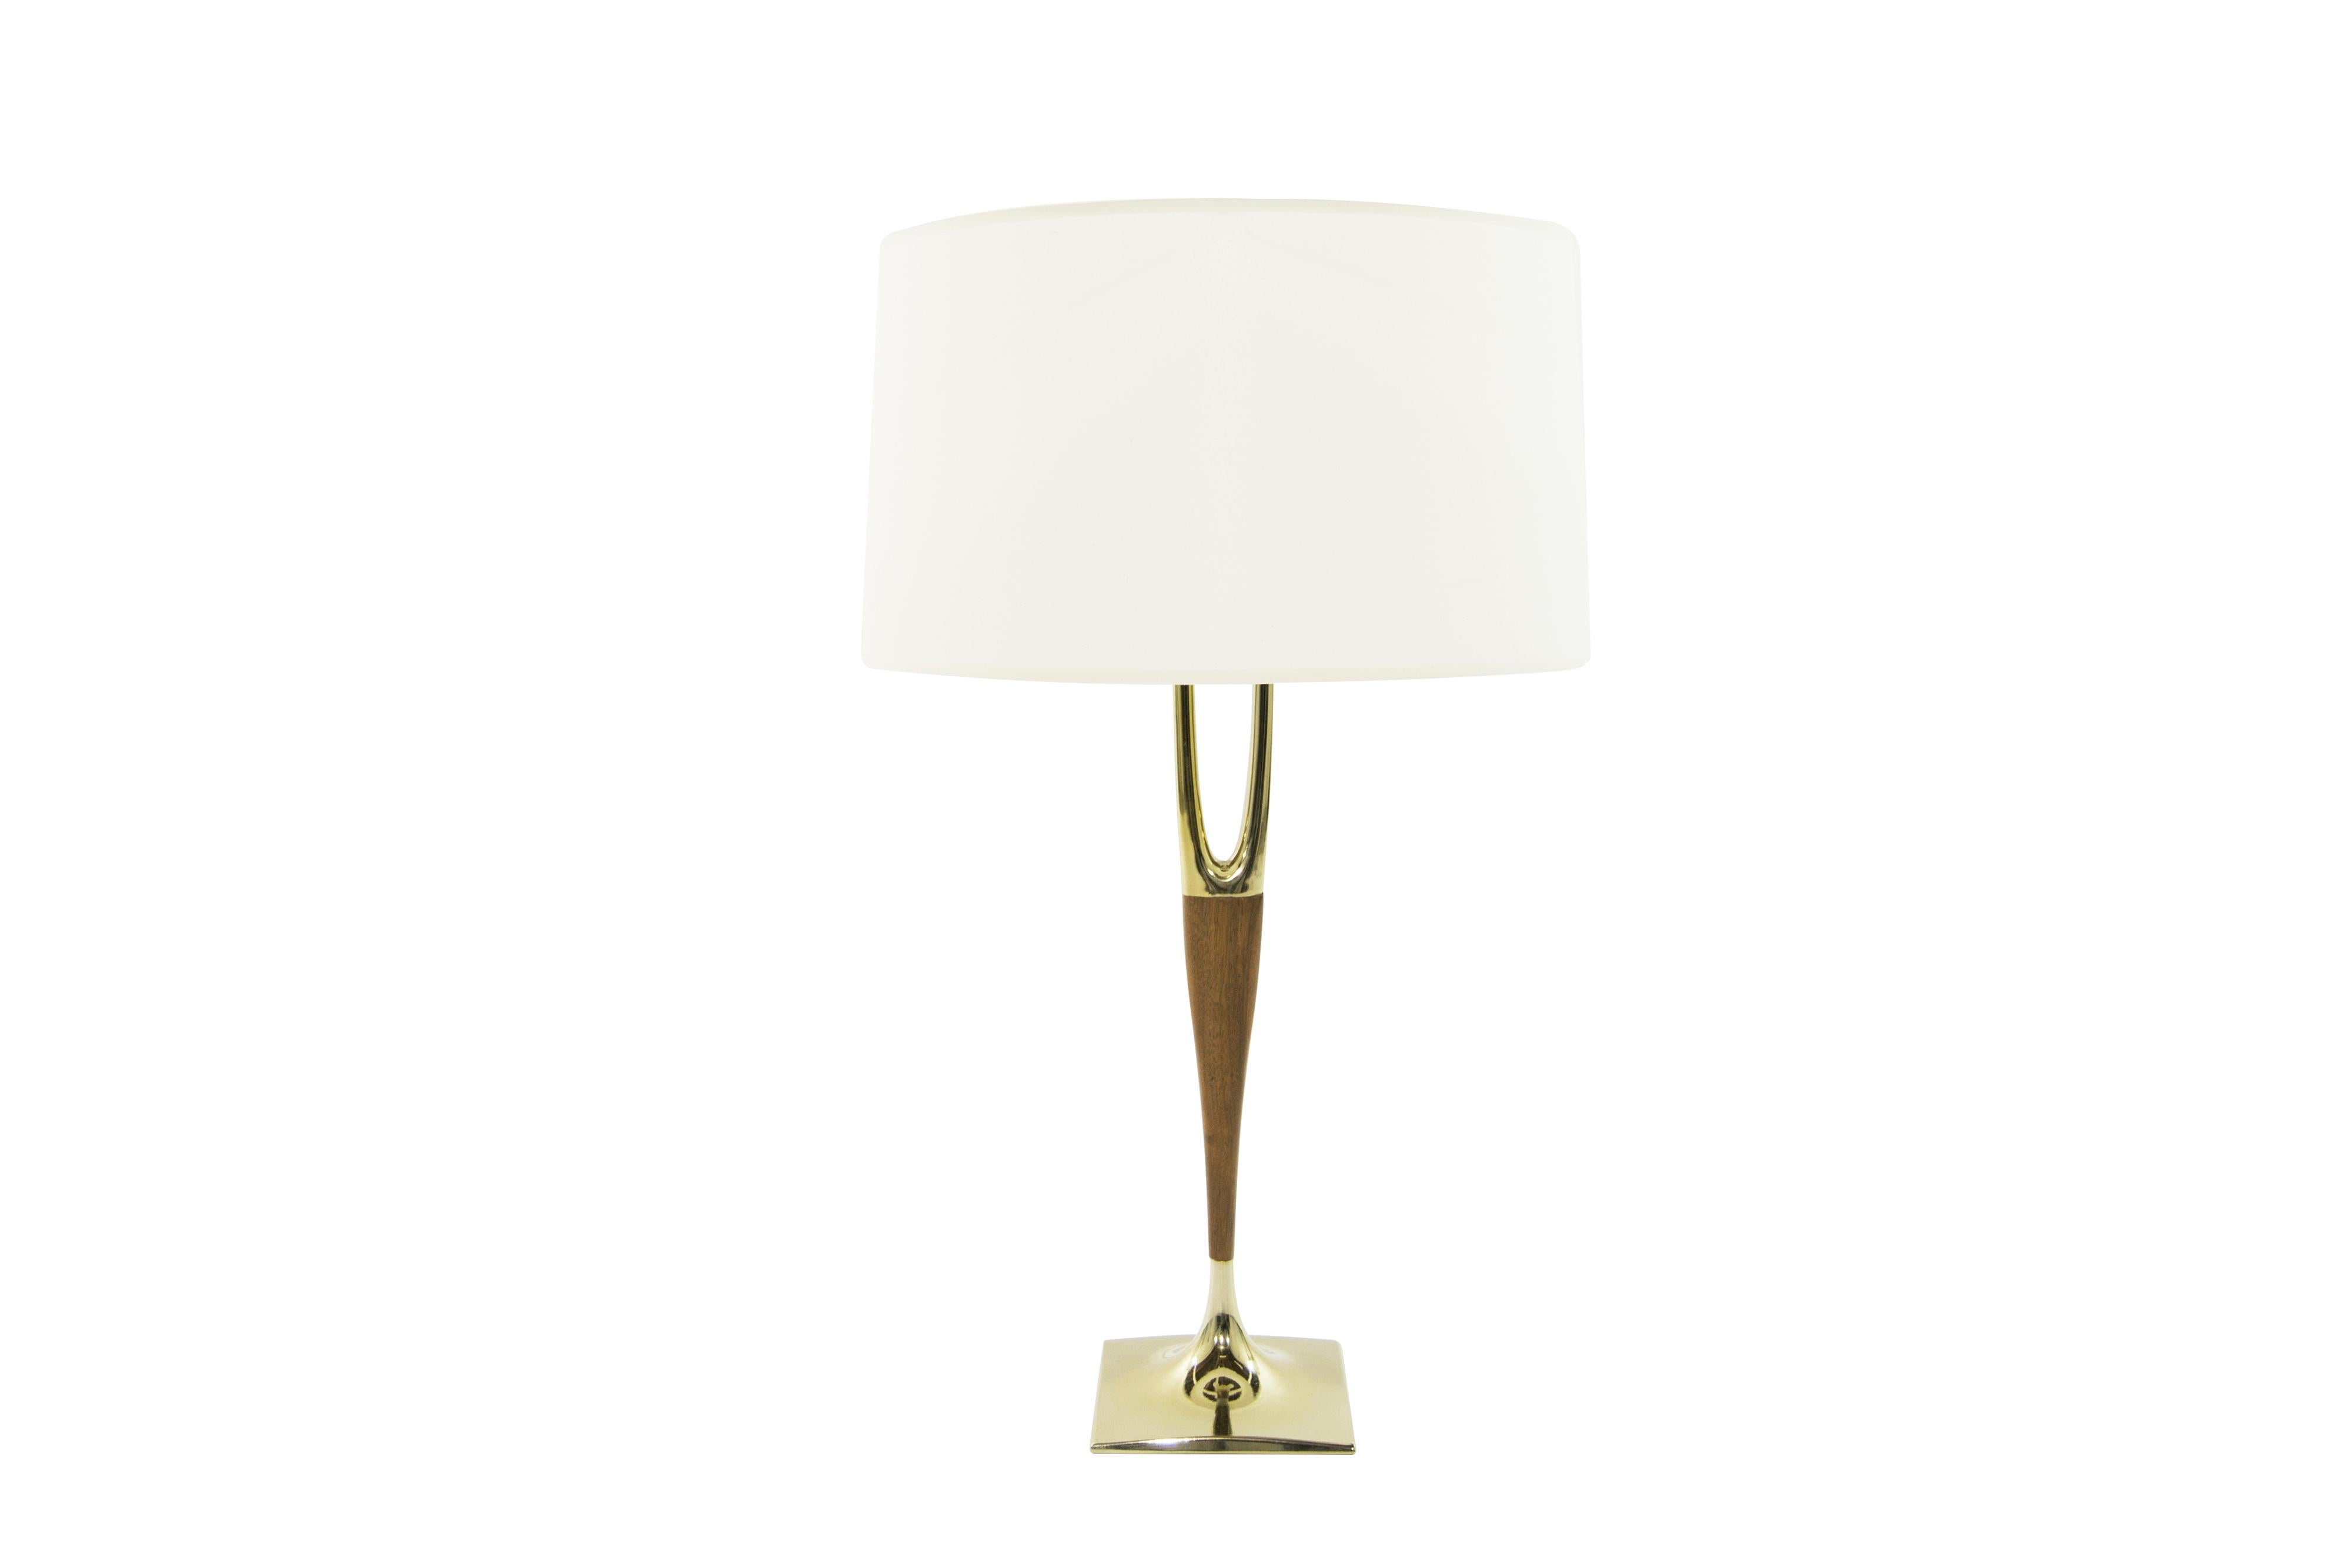 American Gerald Thurston for Laurel Lamp Company Wishbone Table Lamps